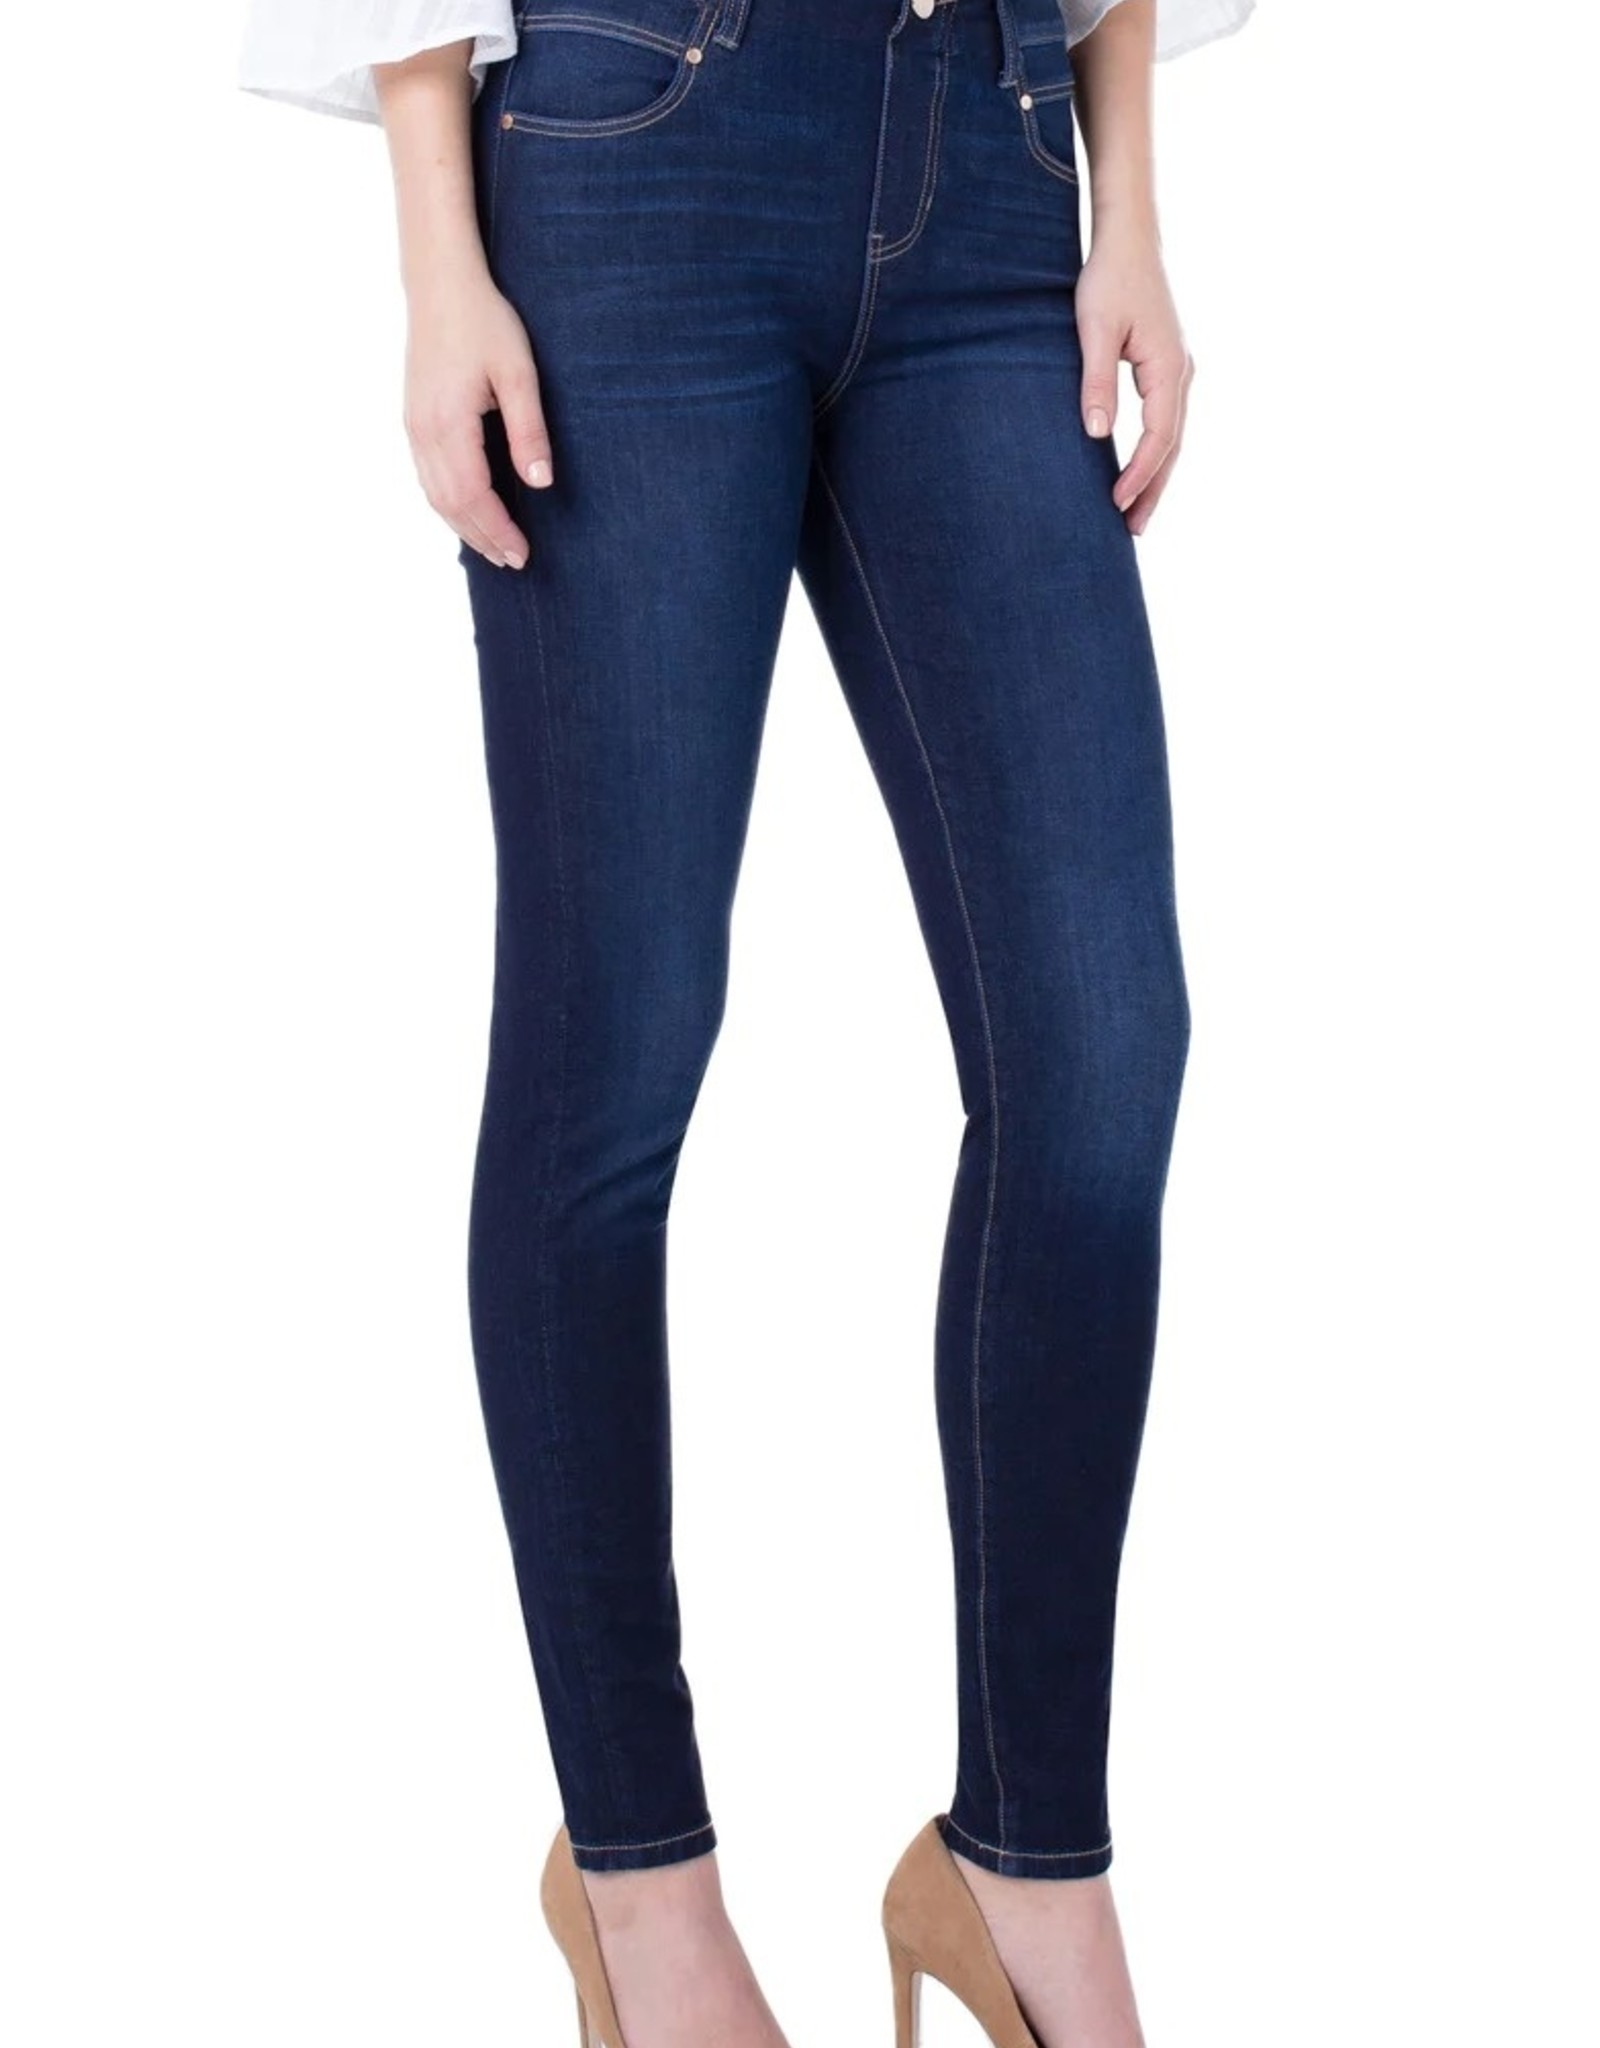 Liverpool Liverpool - FW23 LM2337F80 Gia Glider Skinny Ankle